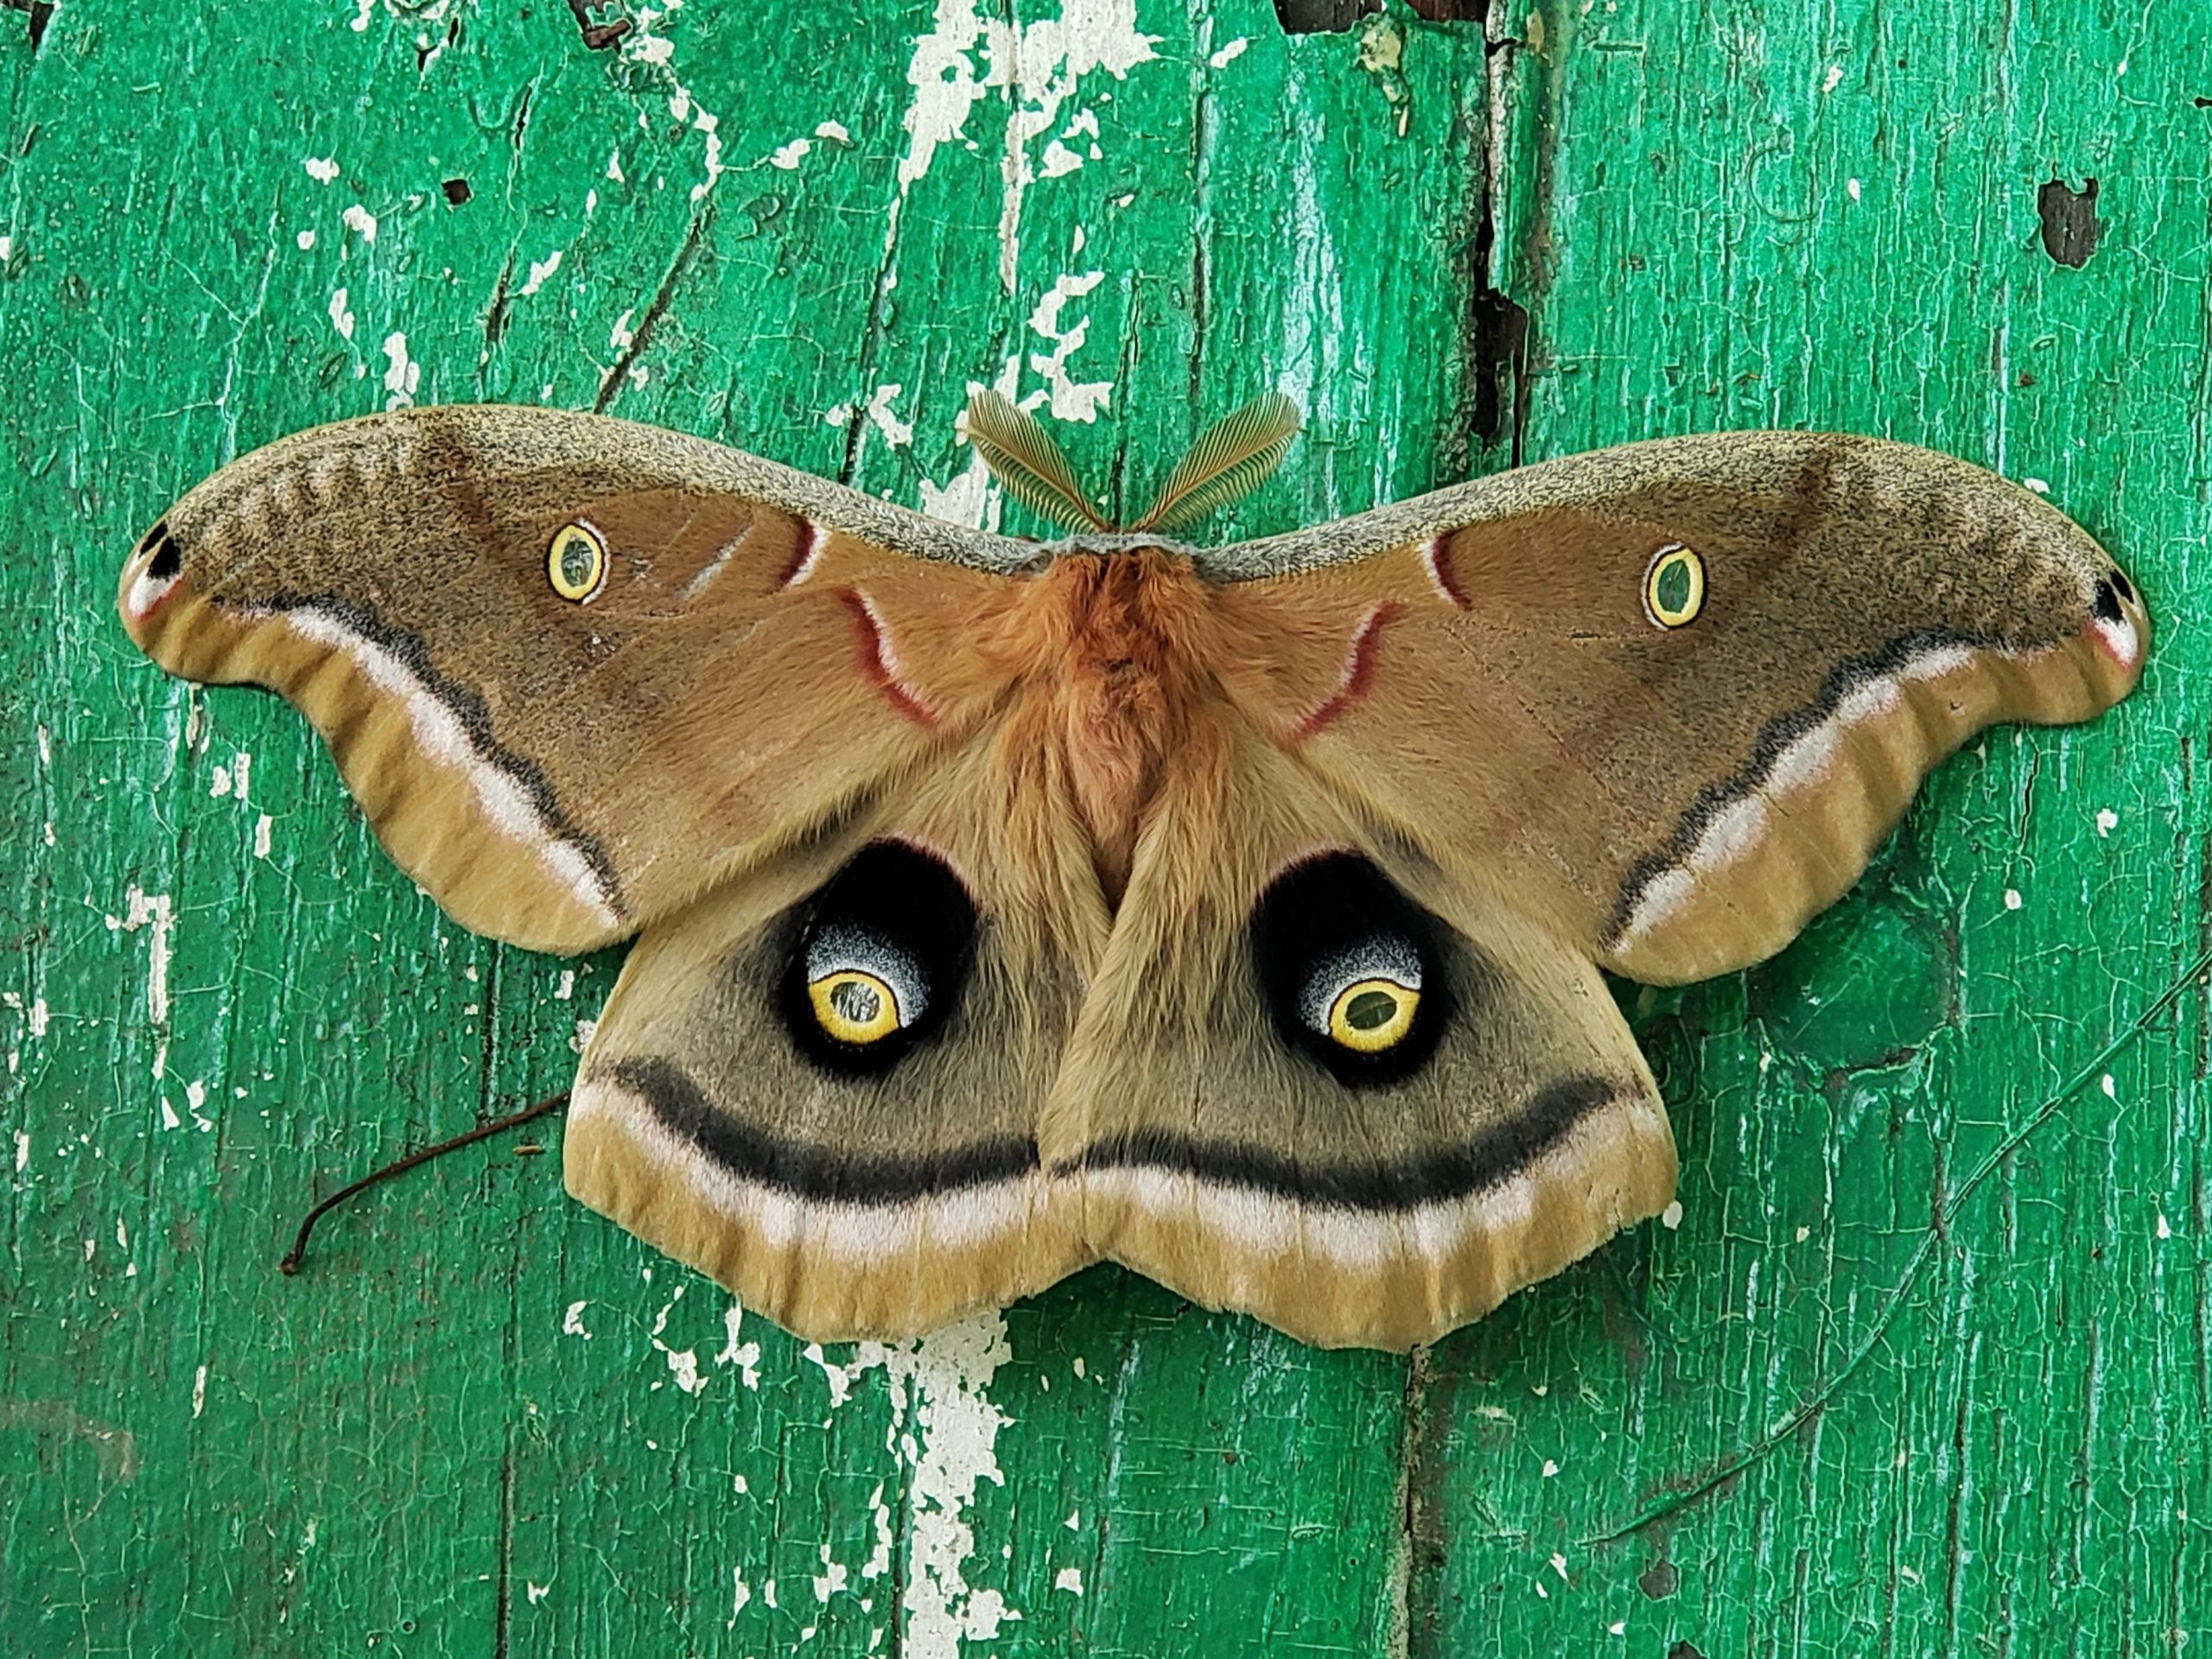 How to Attract More Moths to Your Garden With Light